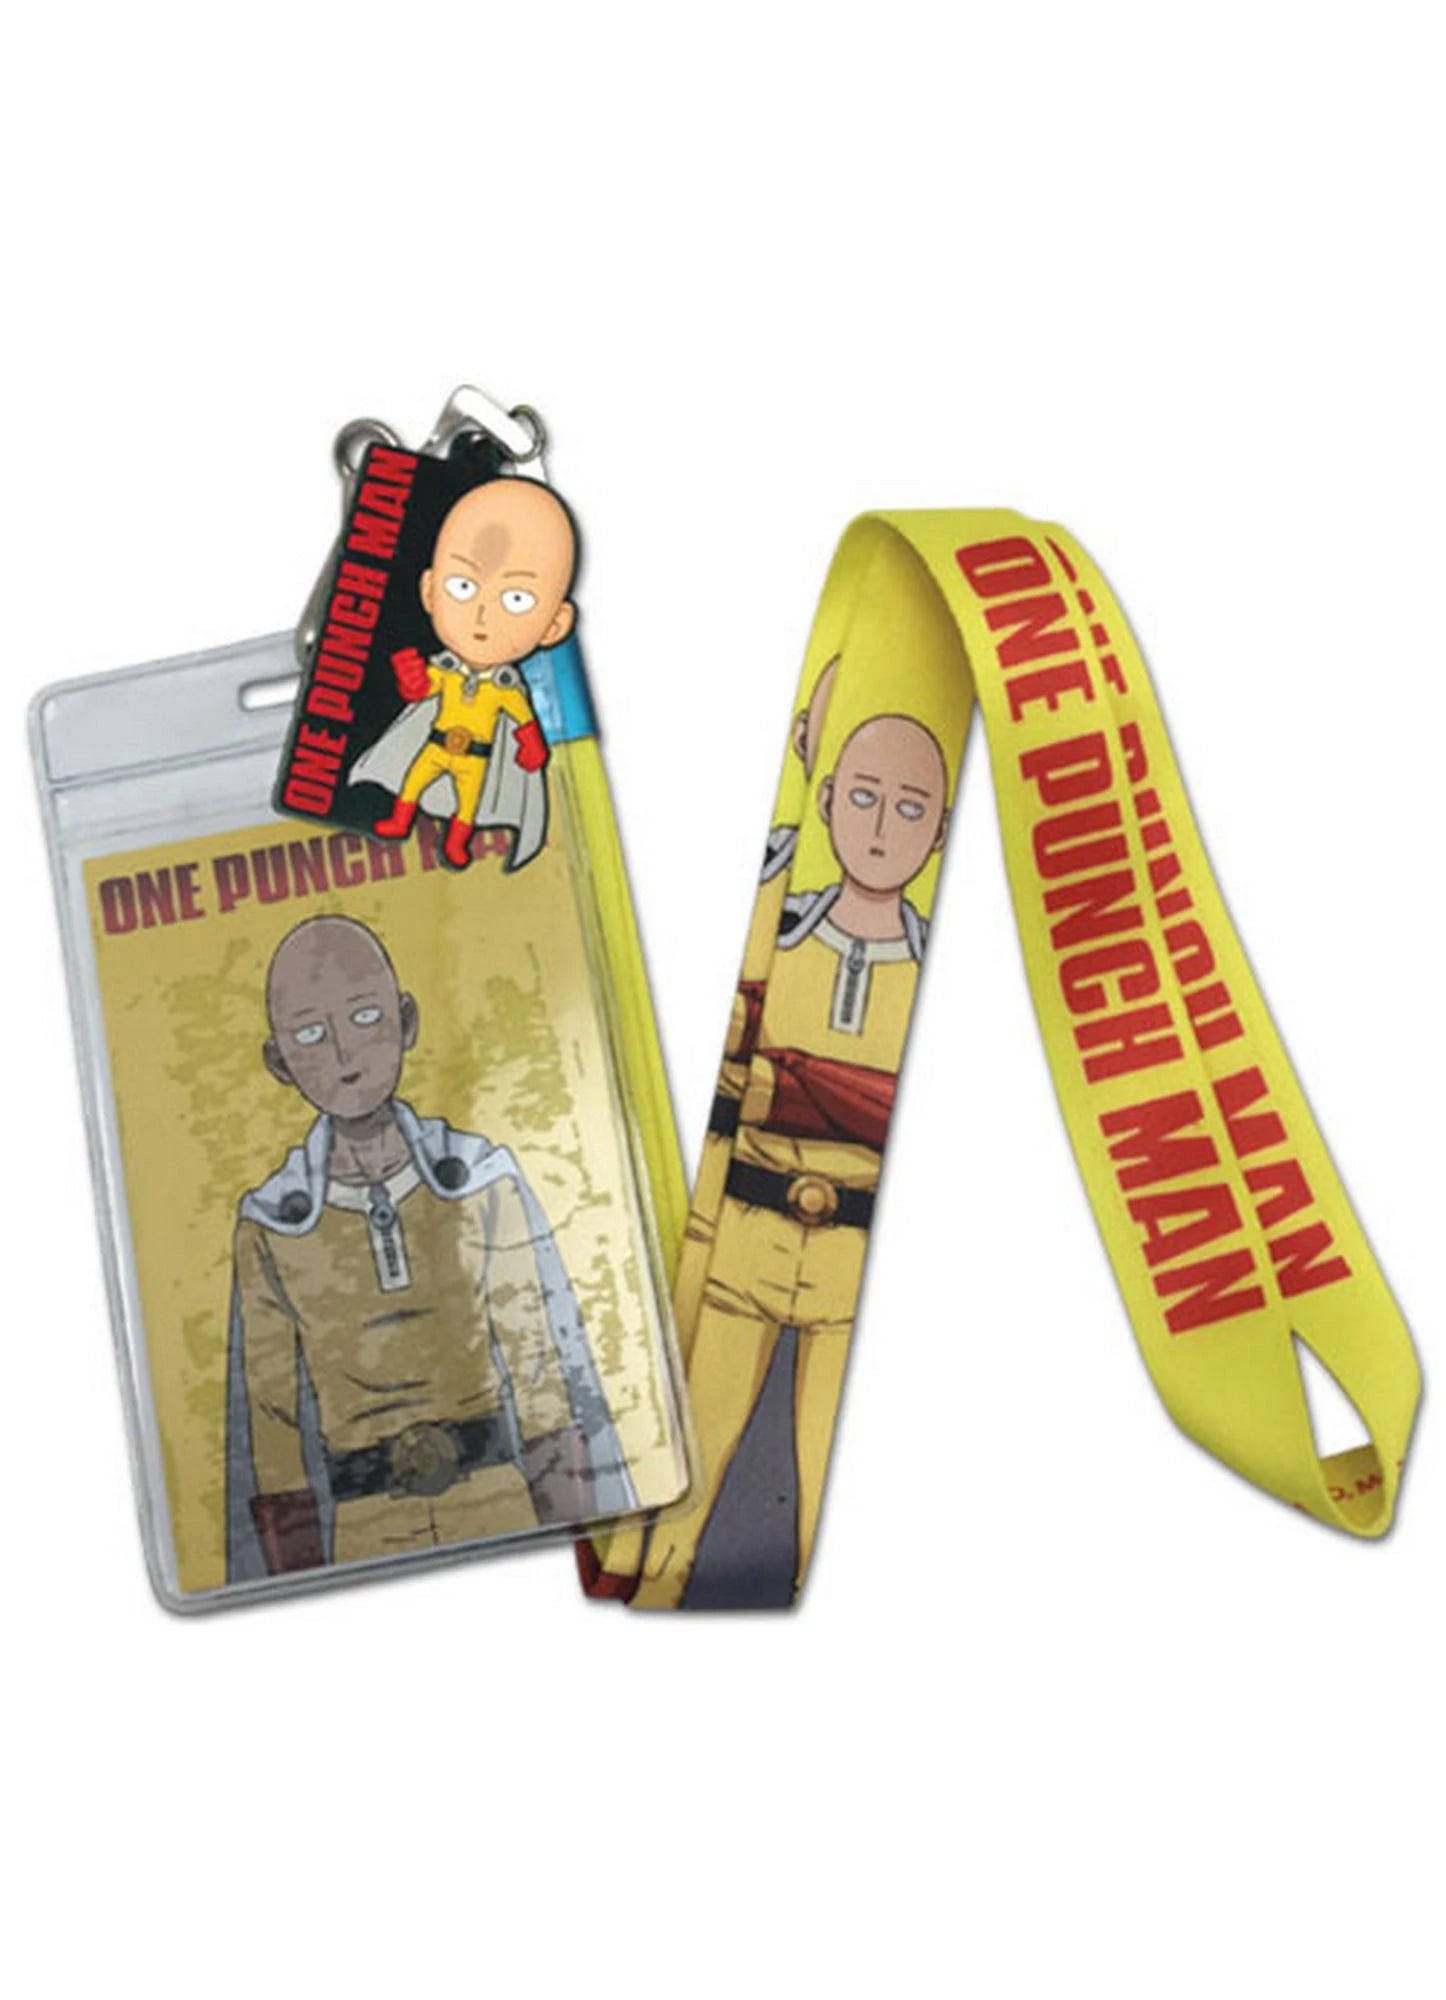 Officially Licenced One Punch Man Saitama Lanyard for Anime Fans | Image